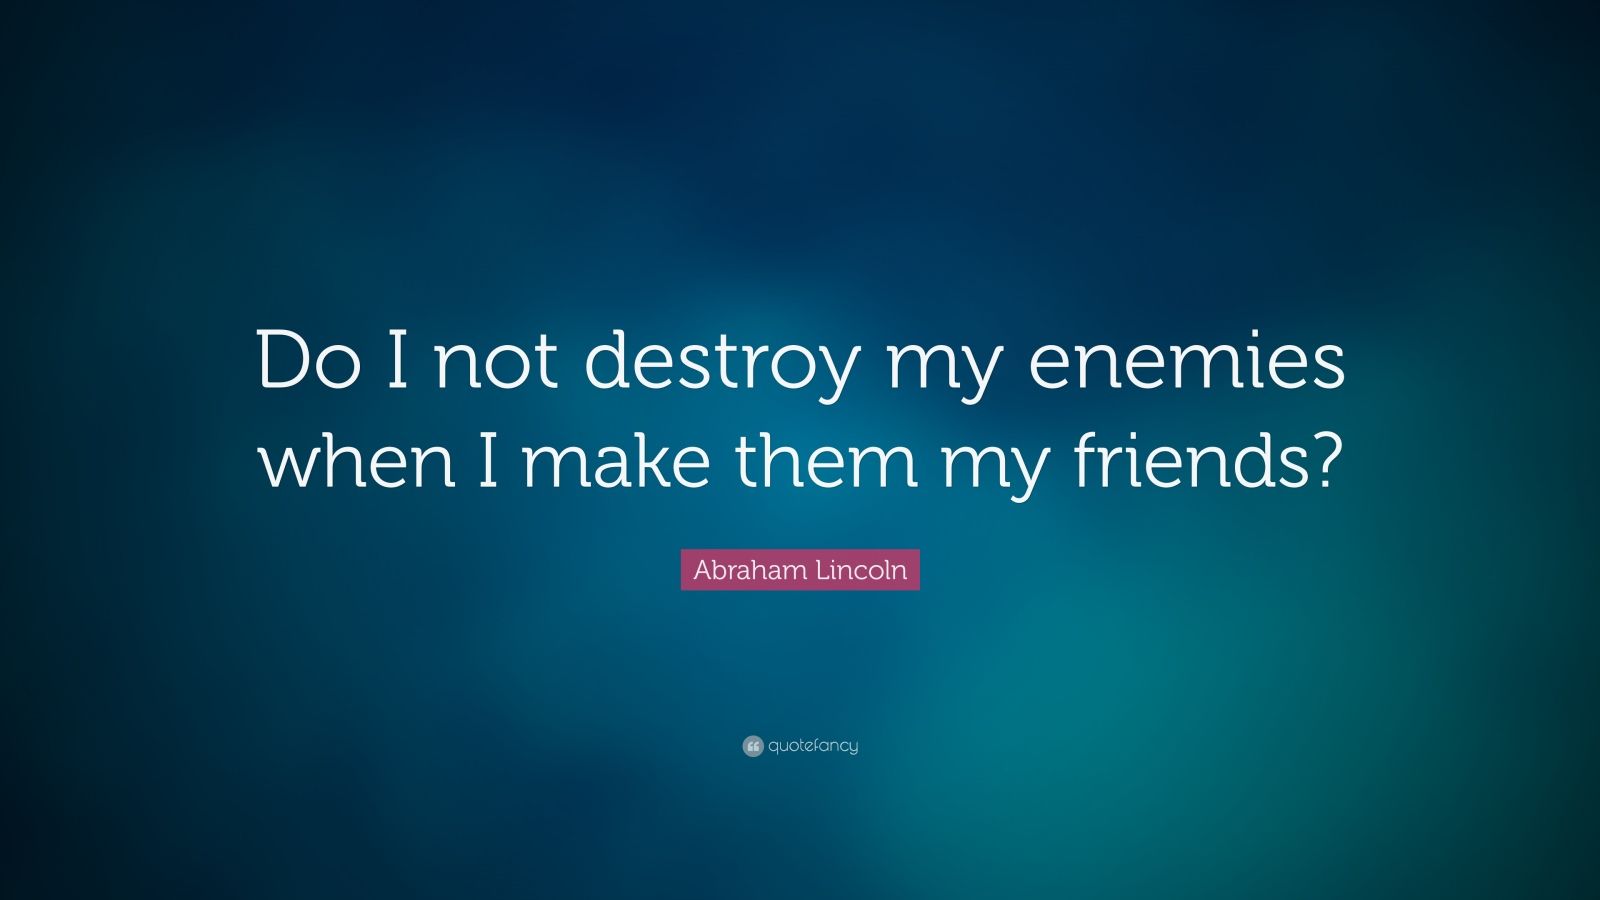 Abraham Lincoln Quote: "Do I not destroy my enemies when I ...